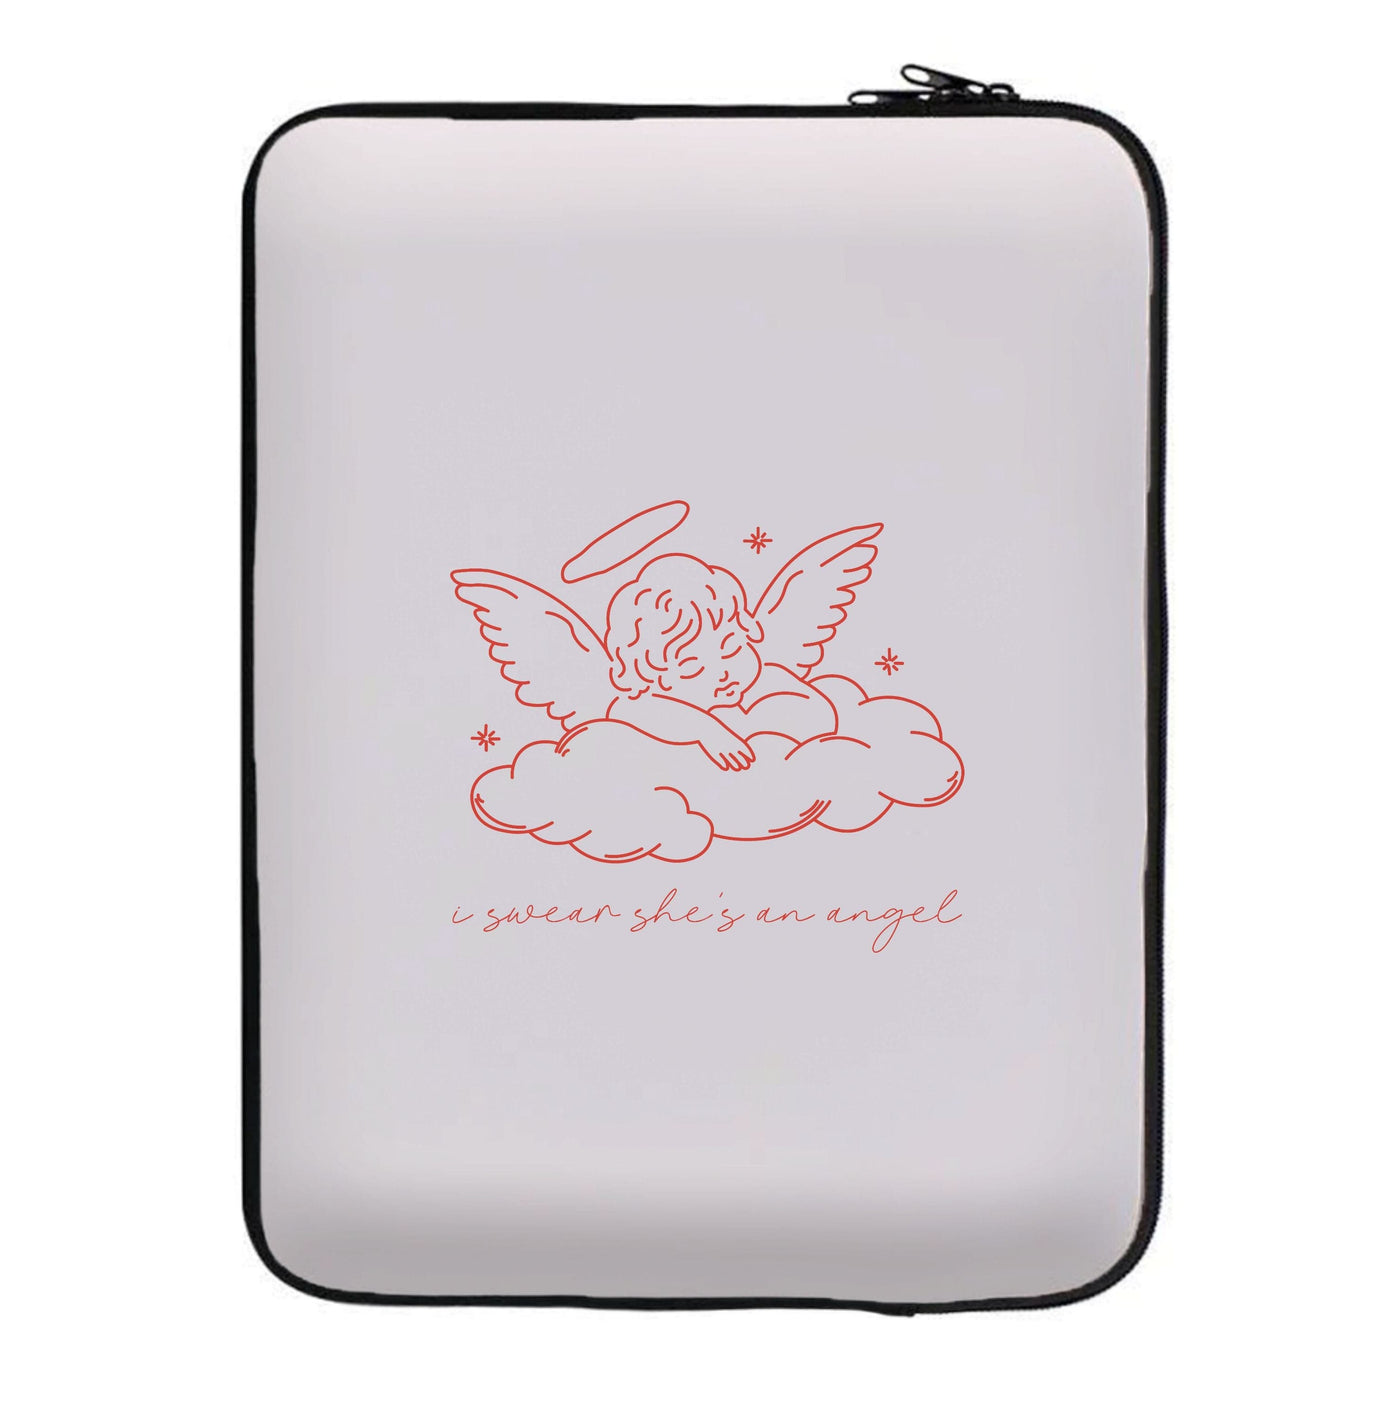 I Swear Shes An Angel - Clean Girl Aesthetic Laptop Sleeve